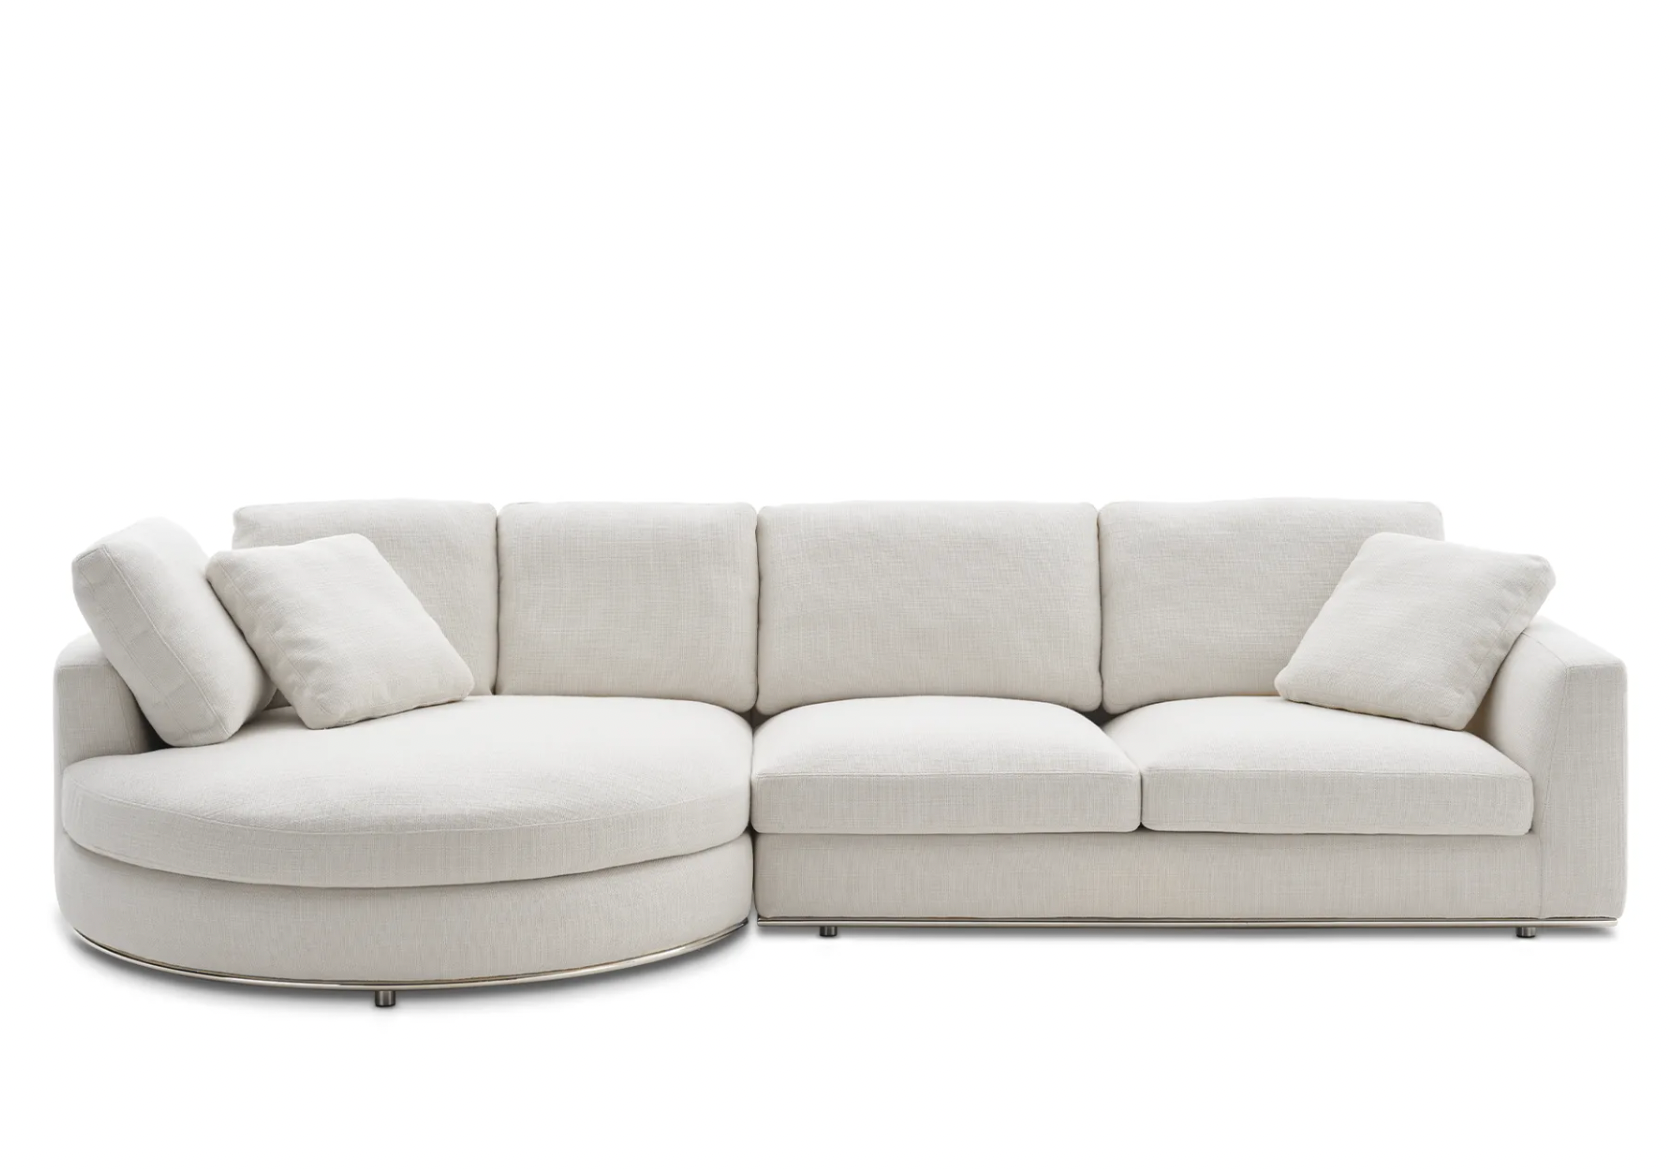 Castlery Owen Chaise Sectional Review 2023